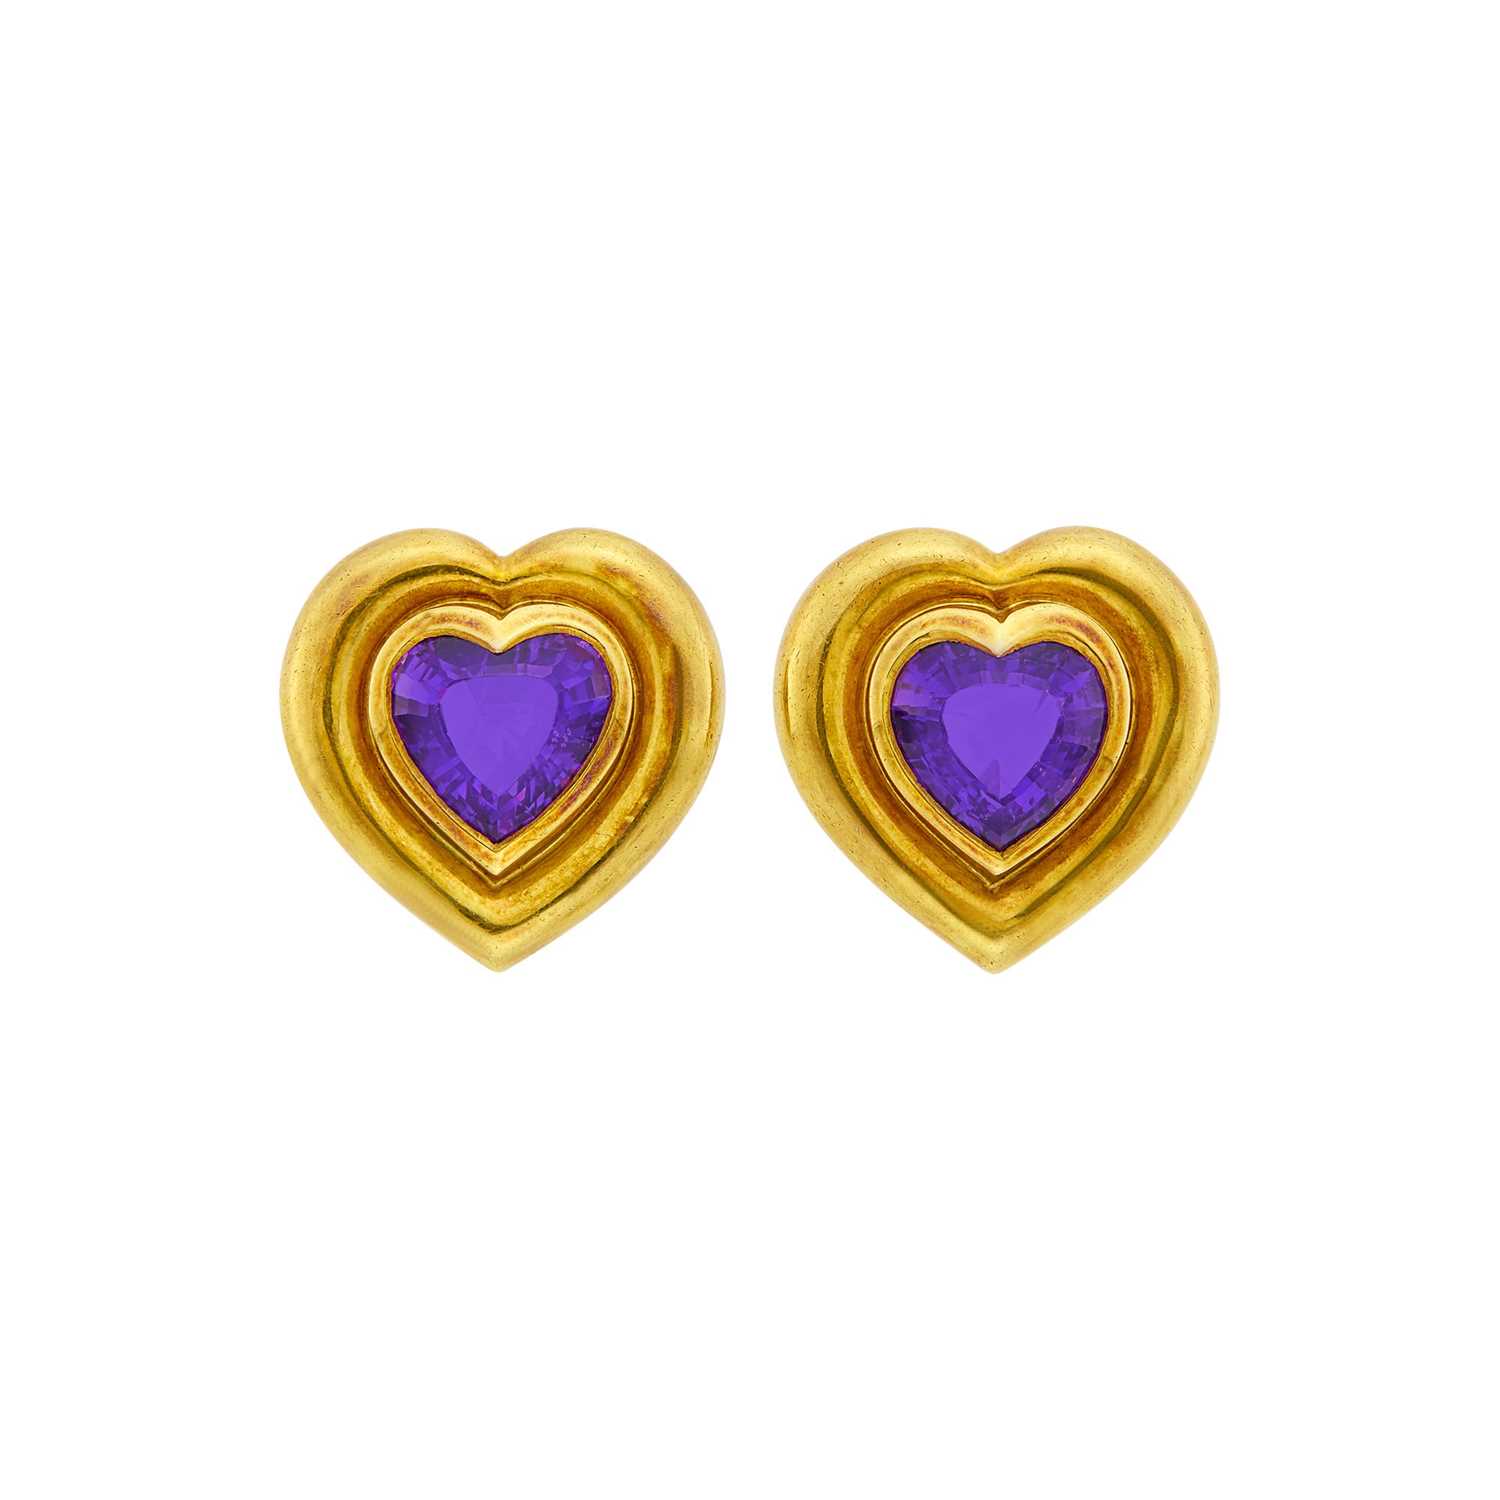 Lot 3 - Tiffany & Co., Paloma Picasso Pair of Gold and Amethyst Heart Earclips